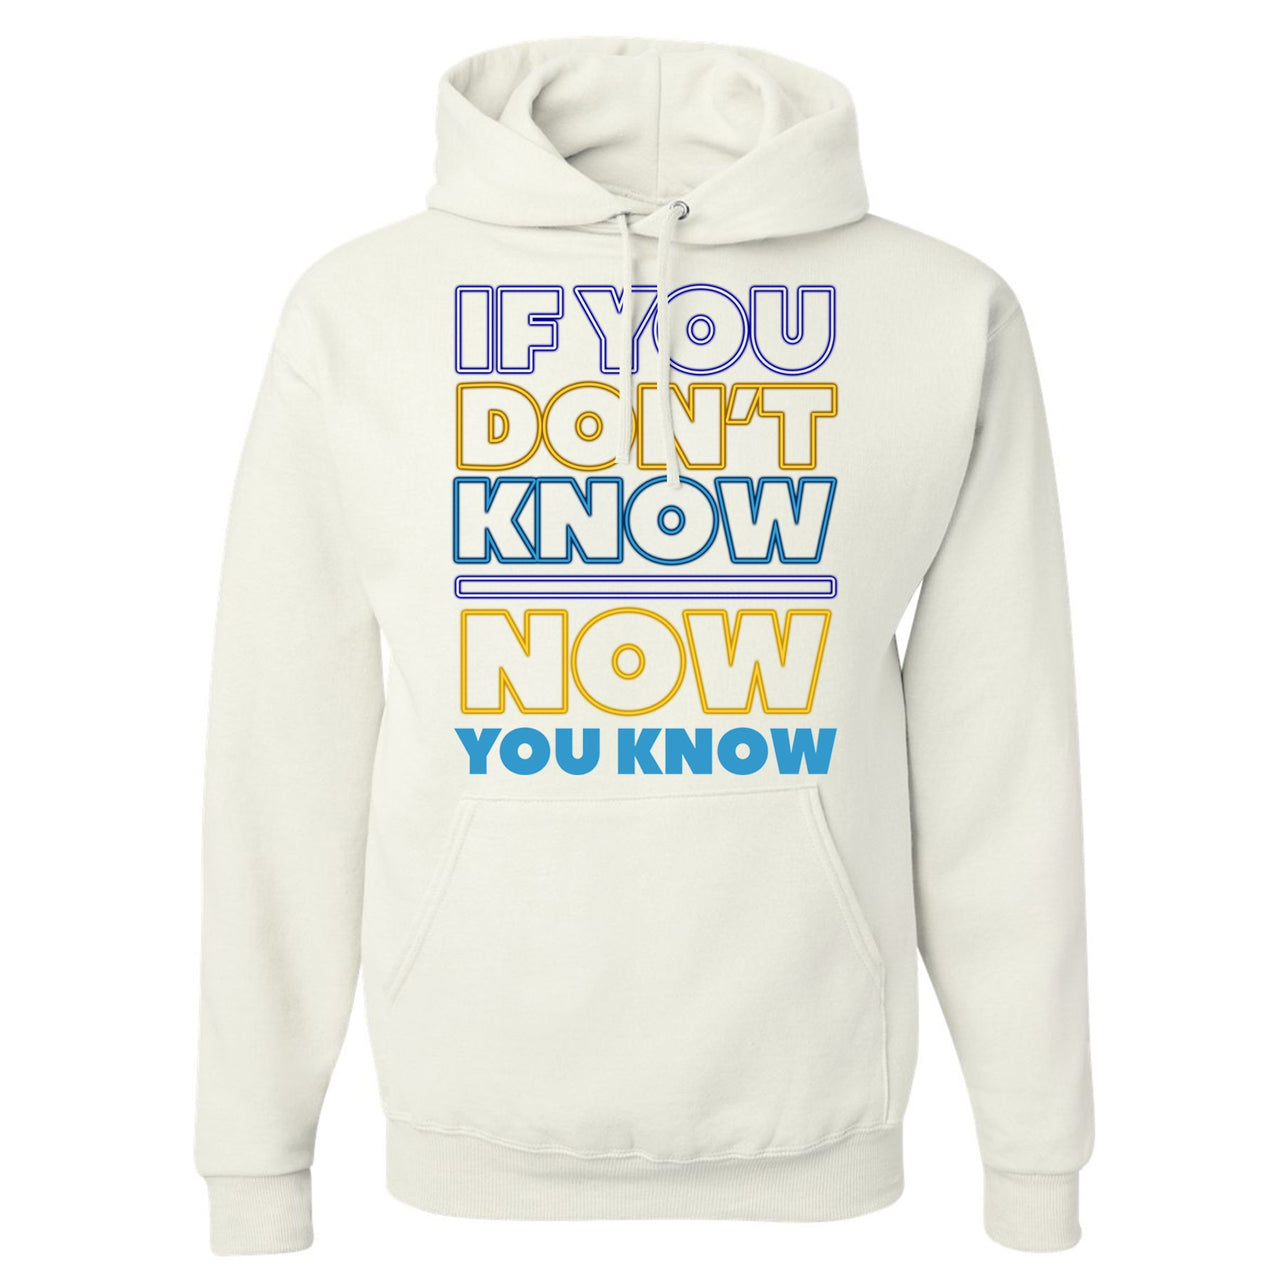 White Aqua 8s Hoodie | If You Don't Know Now You Know, White